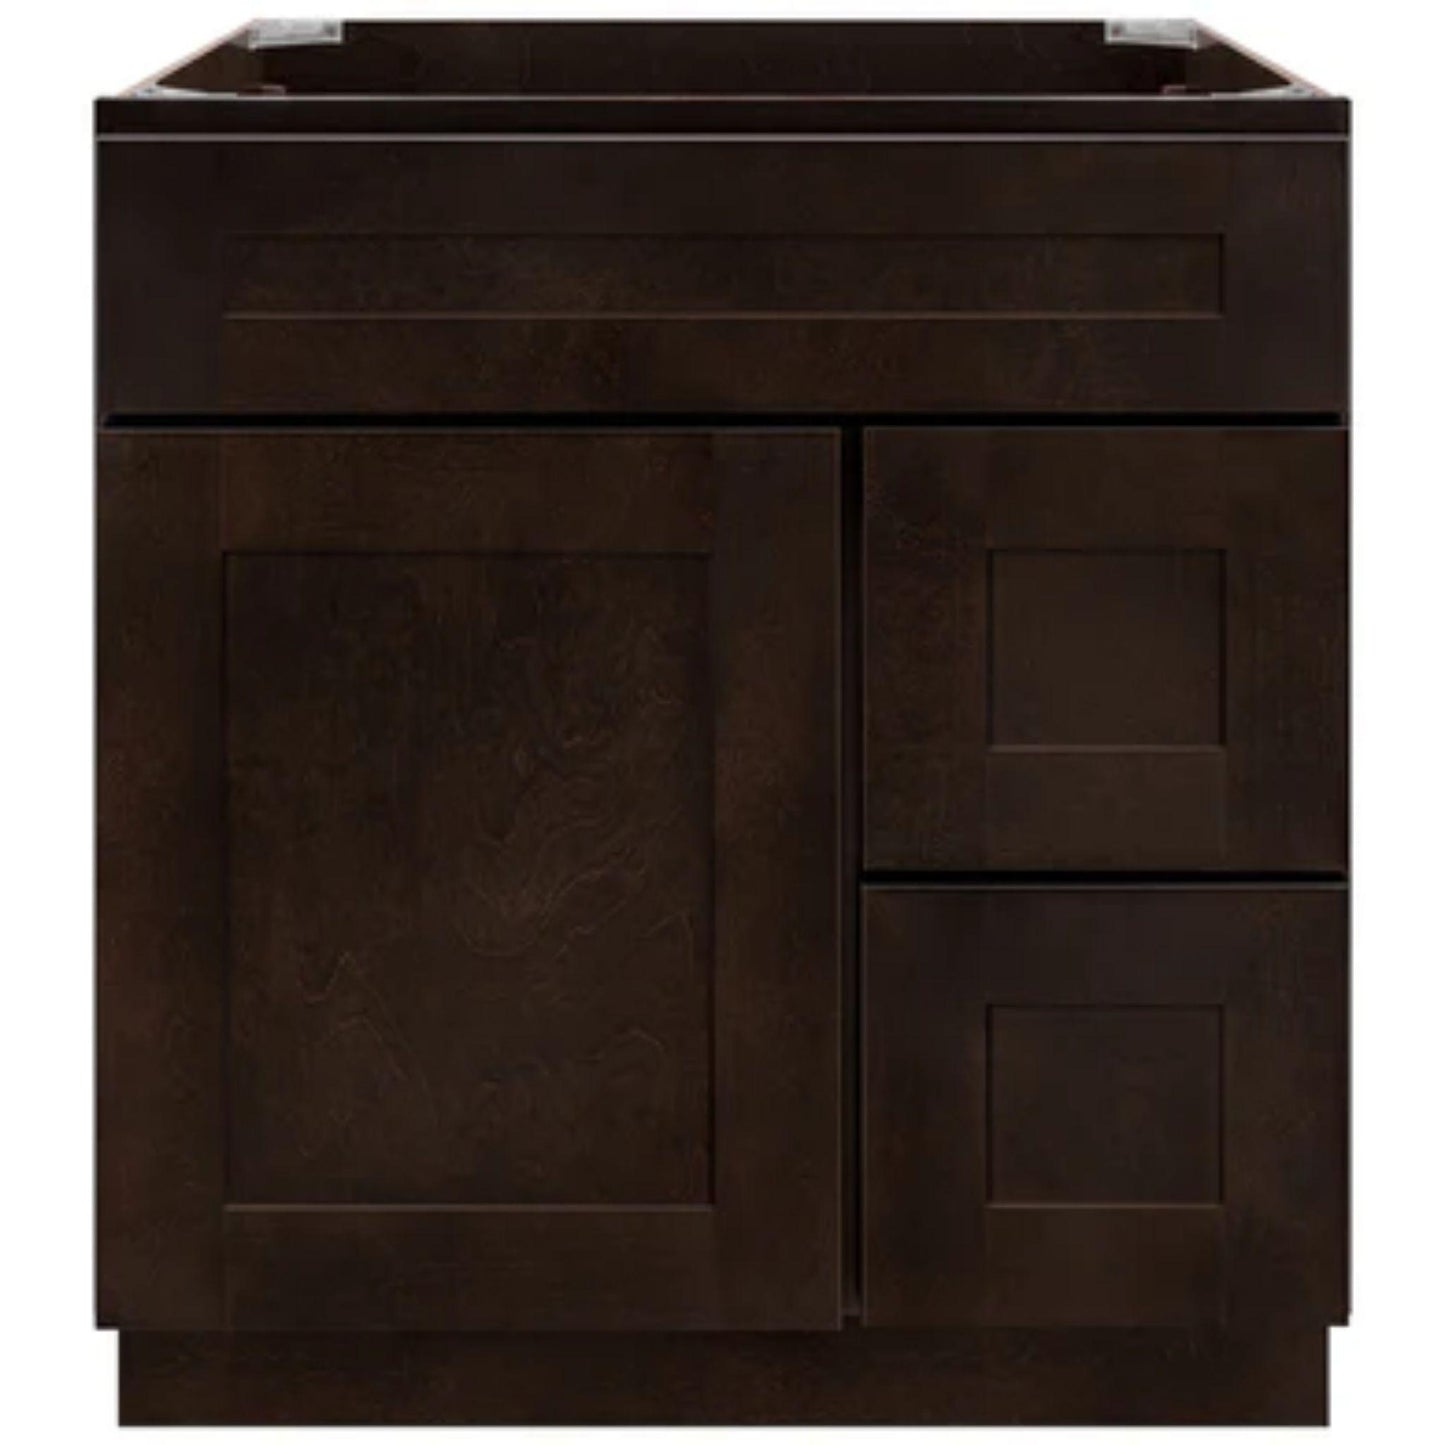 LessCare 30" x 21" x 34 1/2" Espresso Shaker Vanity Sink Base Cabinet with Right Drawers